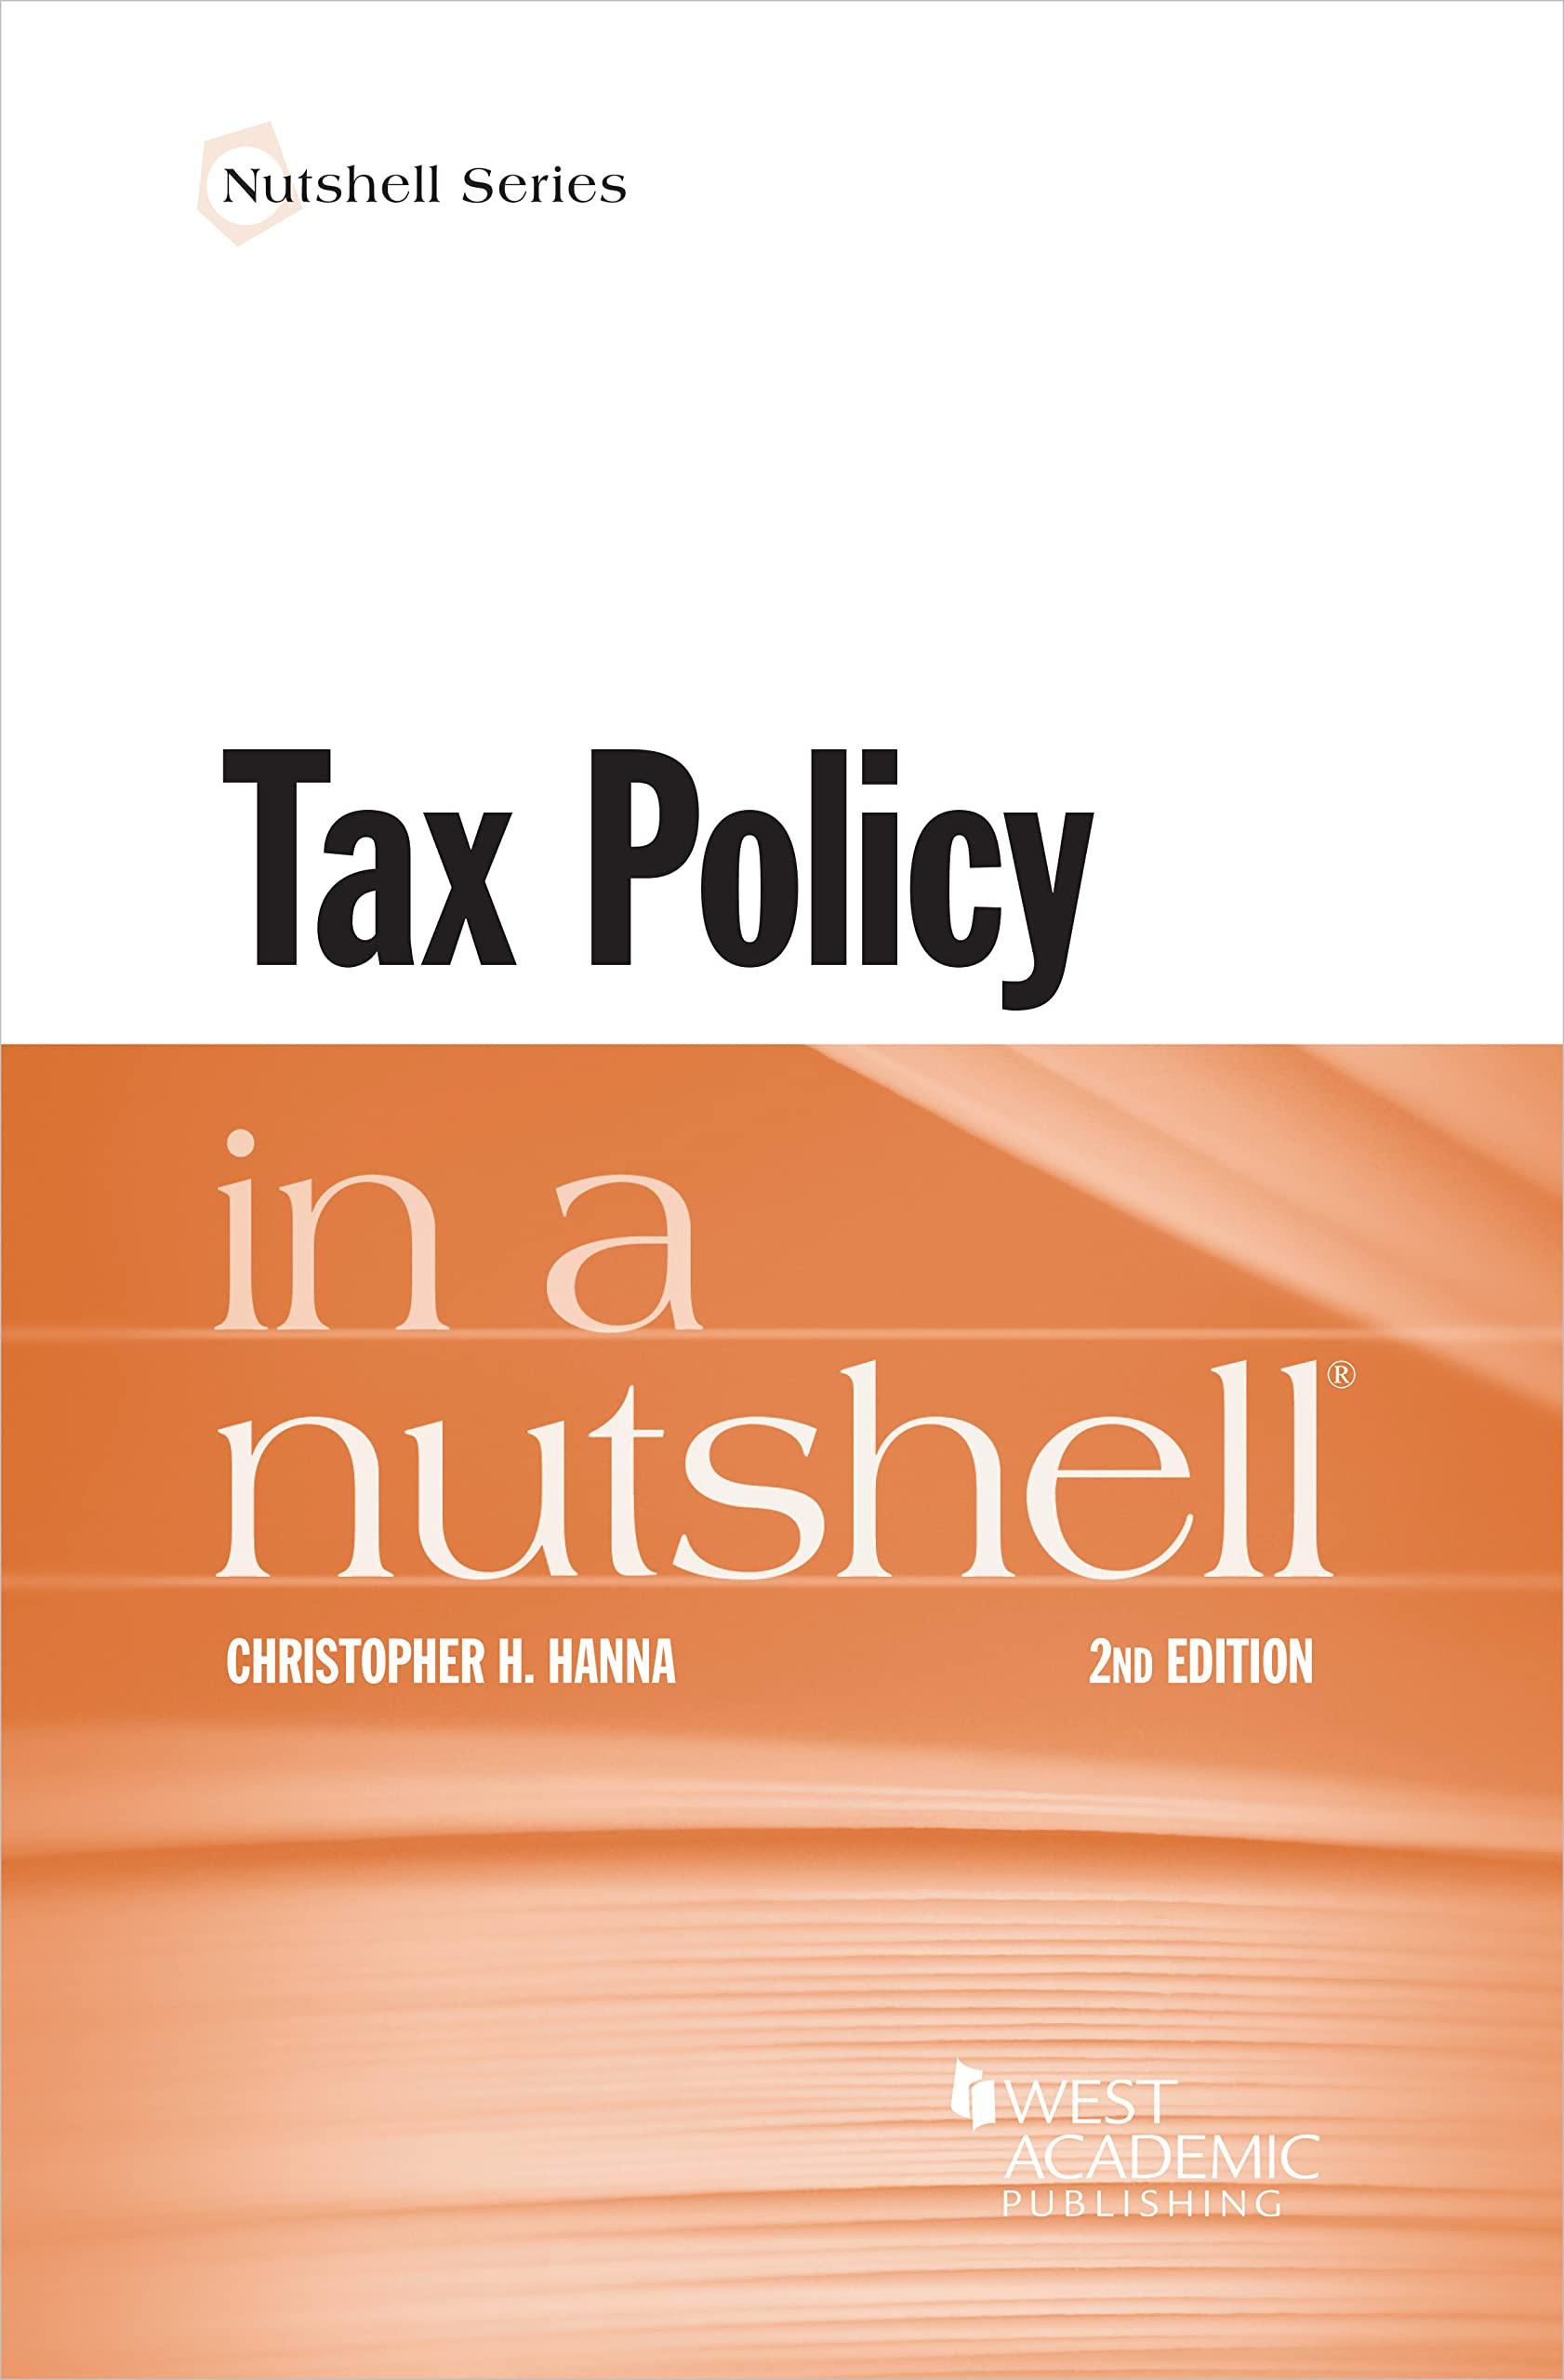 tax policy in a nutshell 2nd edition christopher hanna 1636598722, 9781636598727